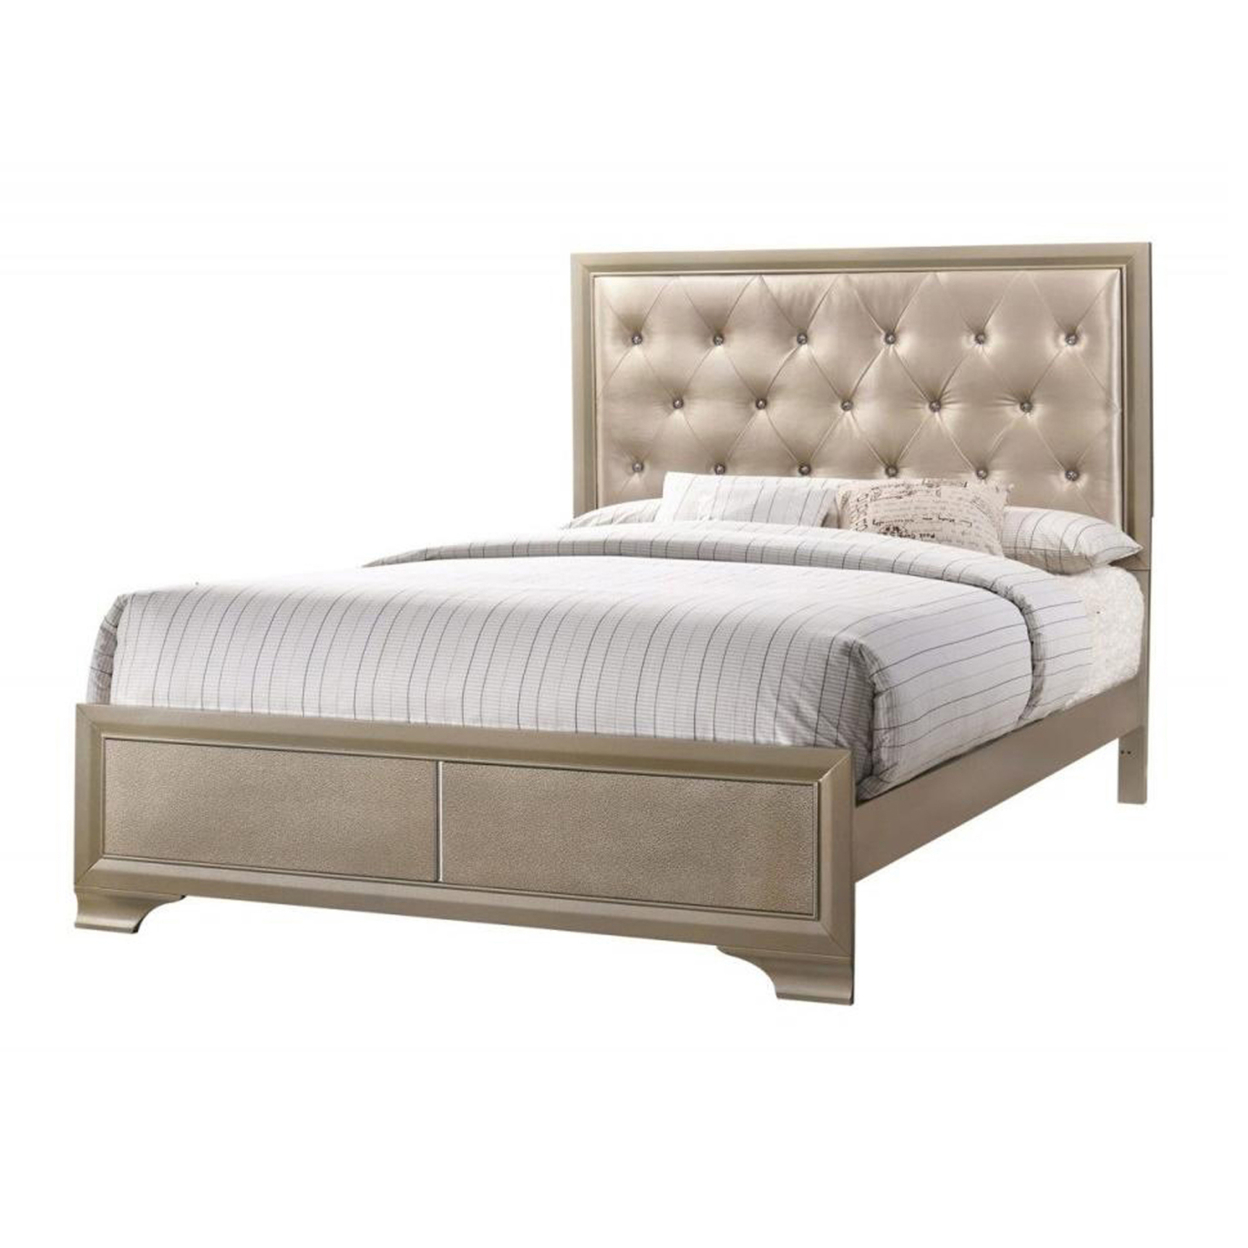 Transitional Wooden Queen Size Bed With Button Tufted Headboard, Champagne- Saltoro Sherpi